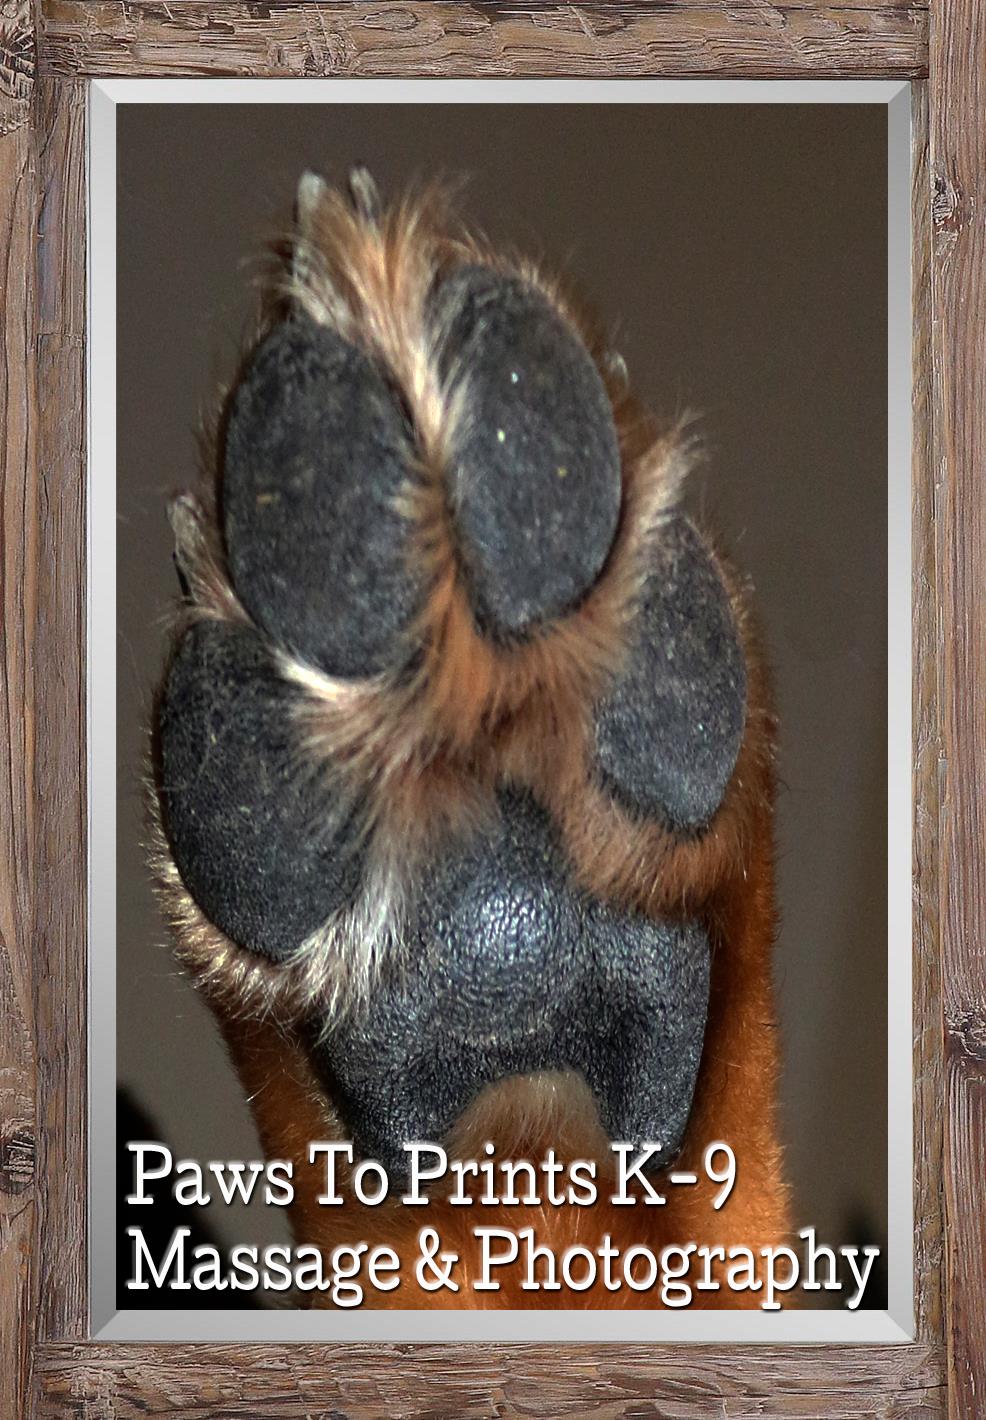 Paws To Prints K-9 Massage & Photography